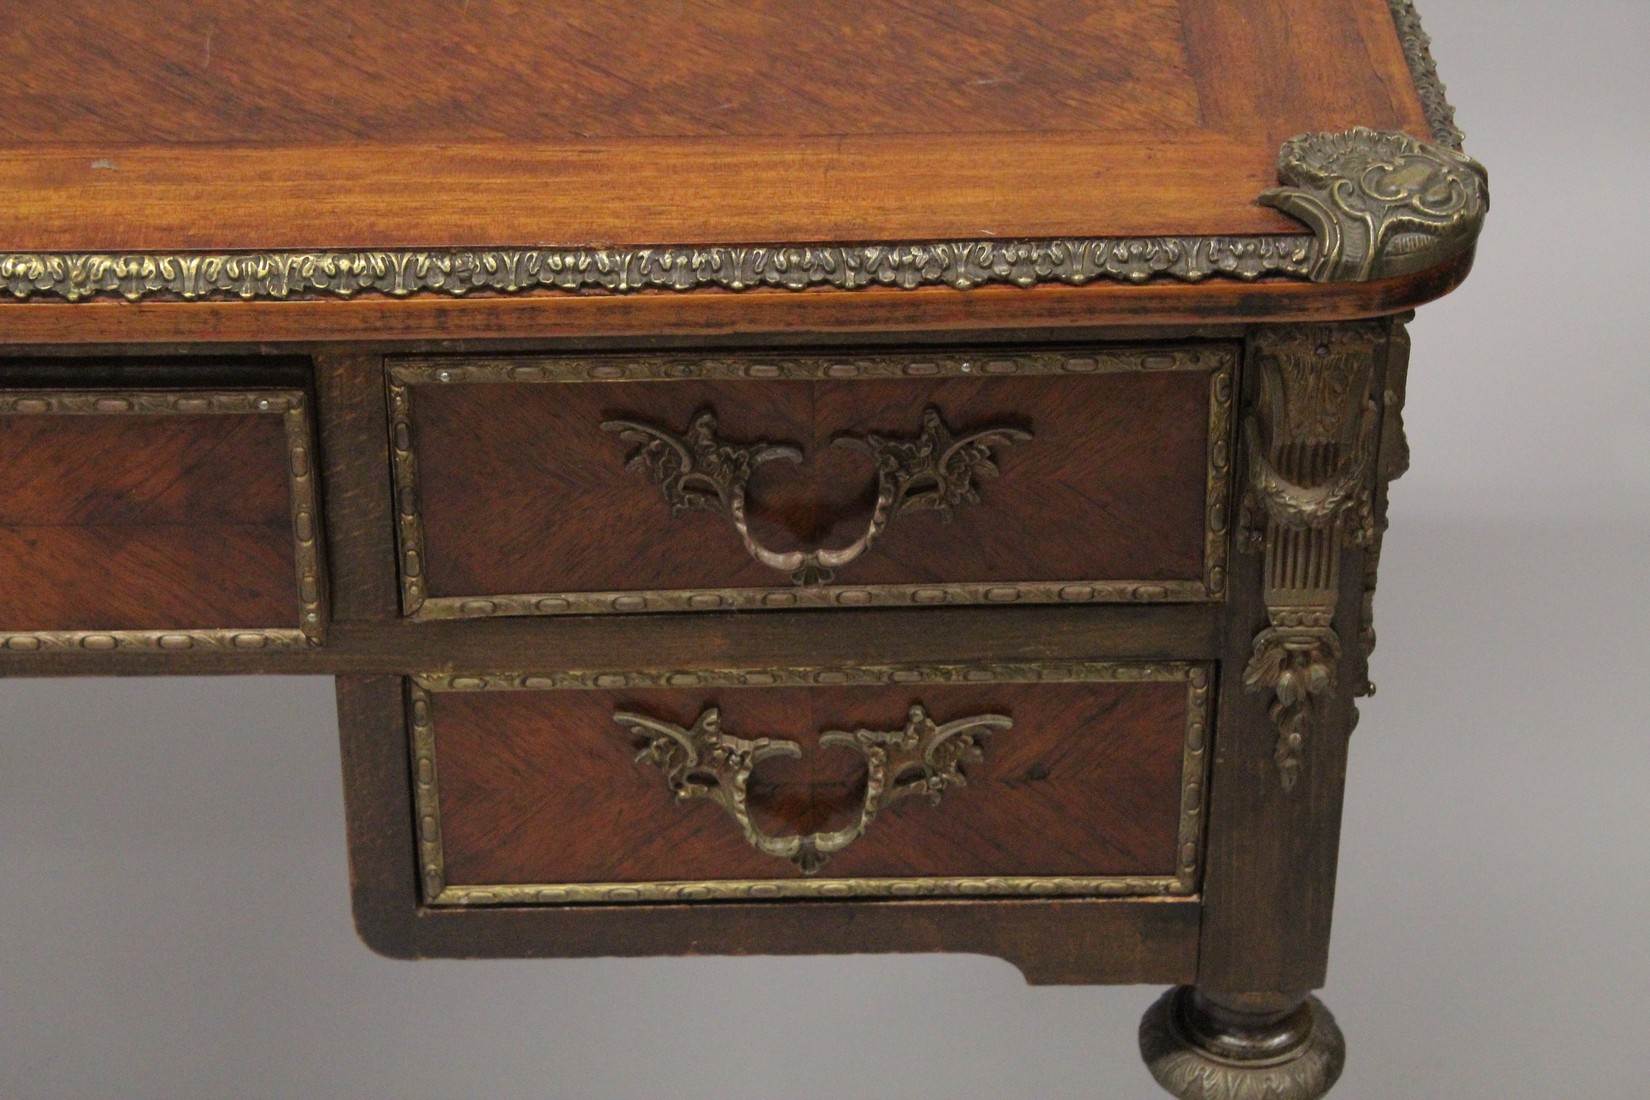 A LOUIS XVITH DESIGN WRITING TABLE with wooden top, five drawers on turned legs with ormolu - Image 4 of 7